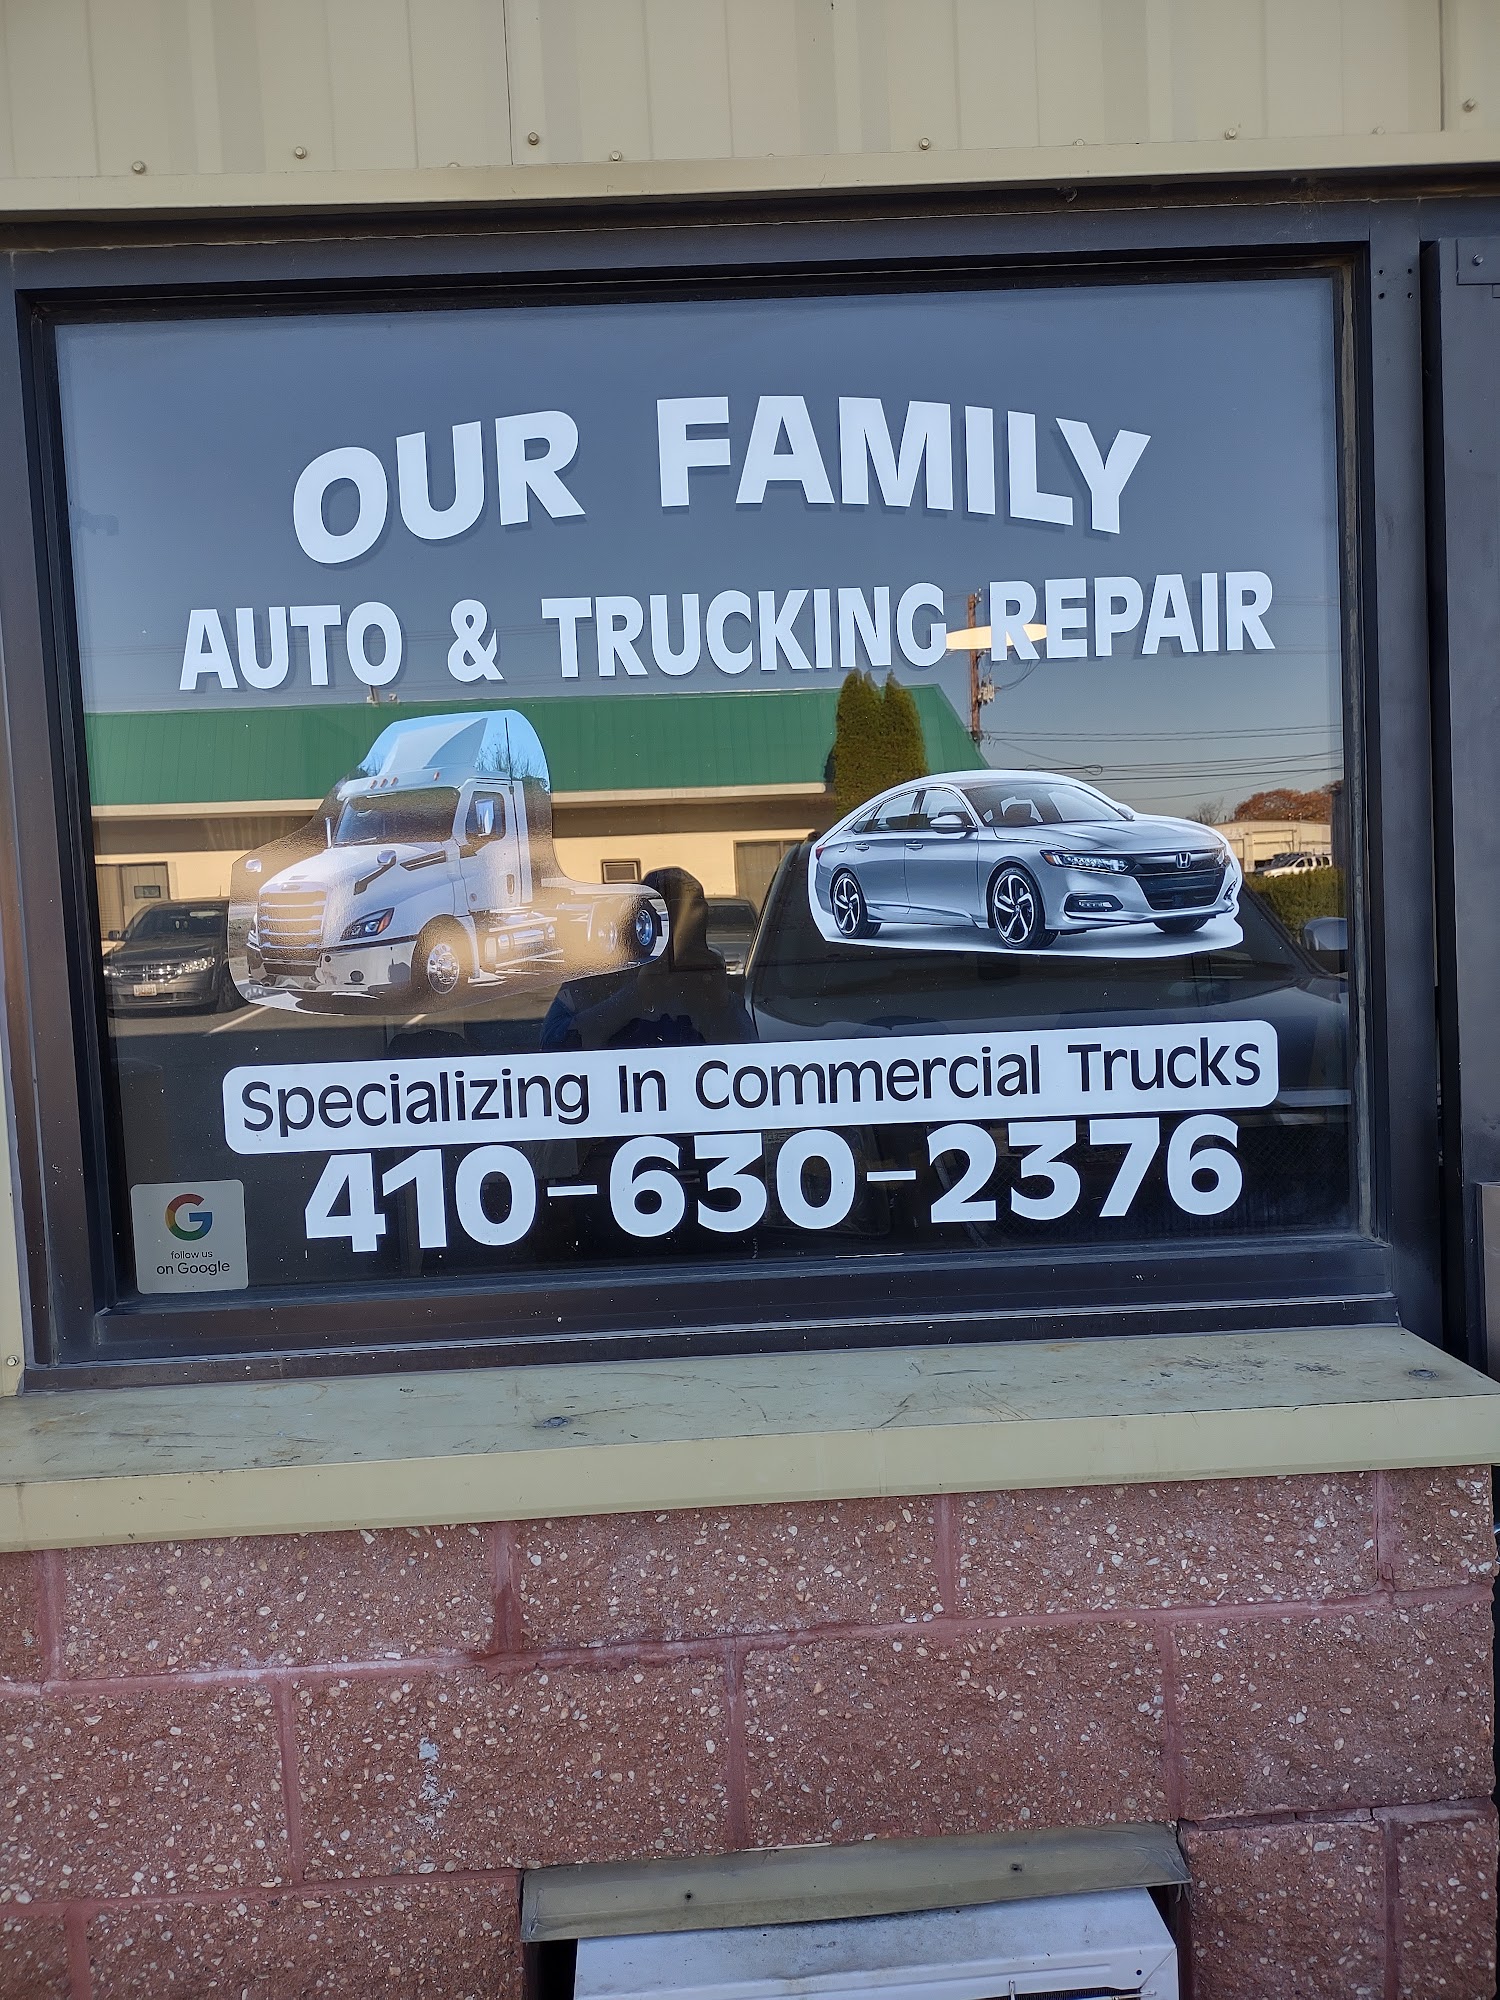 Our Family Auto and Trucking Repair